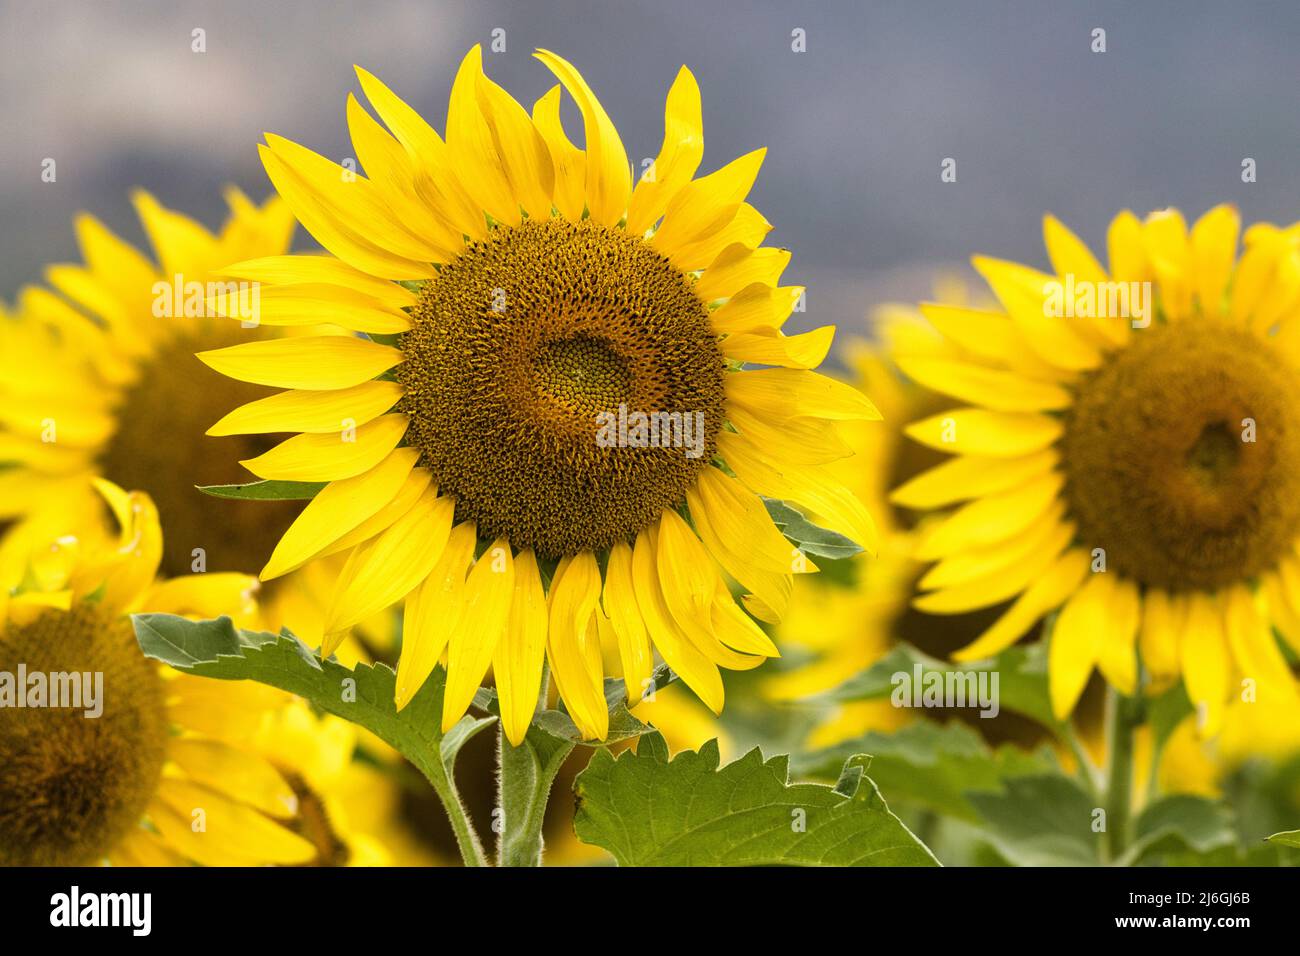 Ultra close-up of sunflowers in a sustainable energy farm. Stock Photo